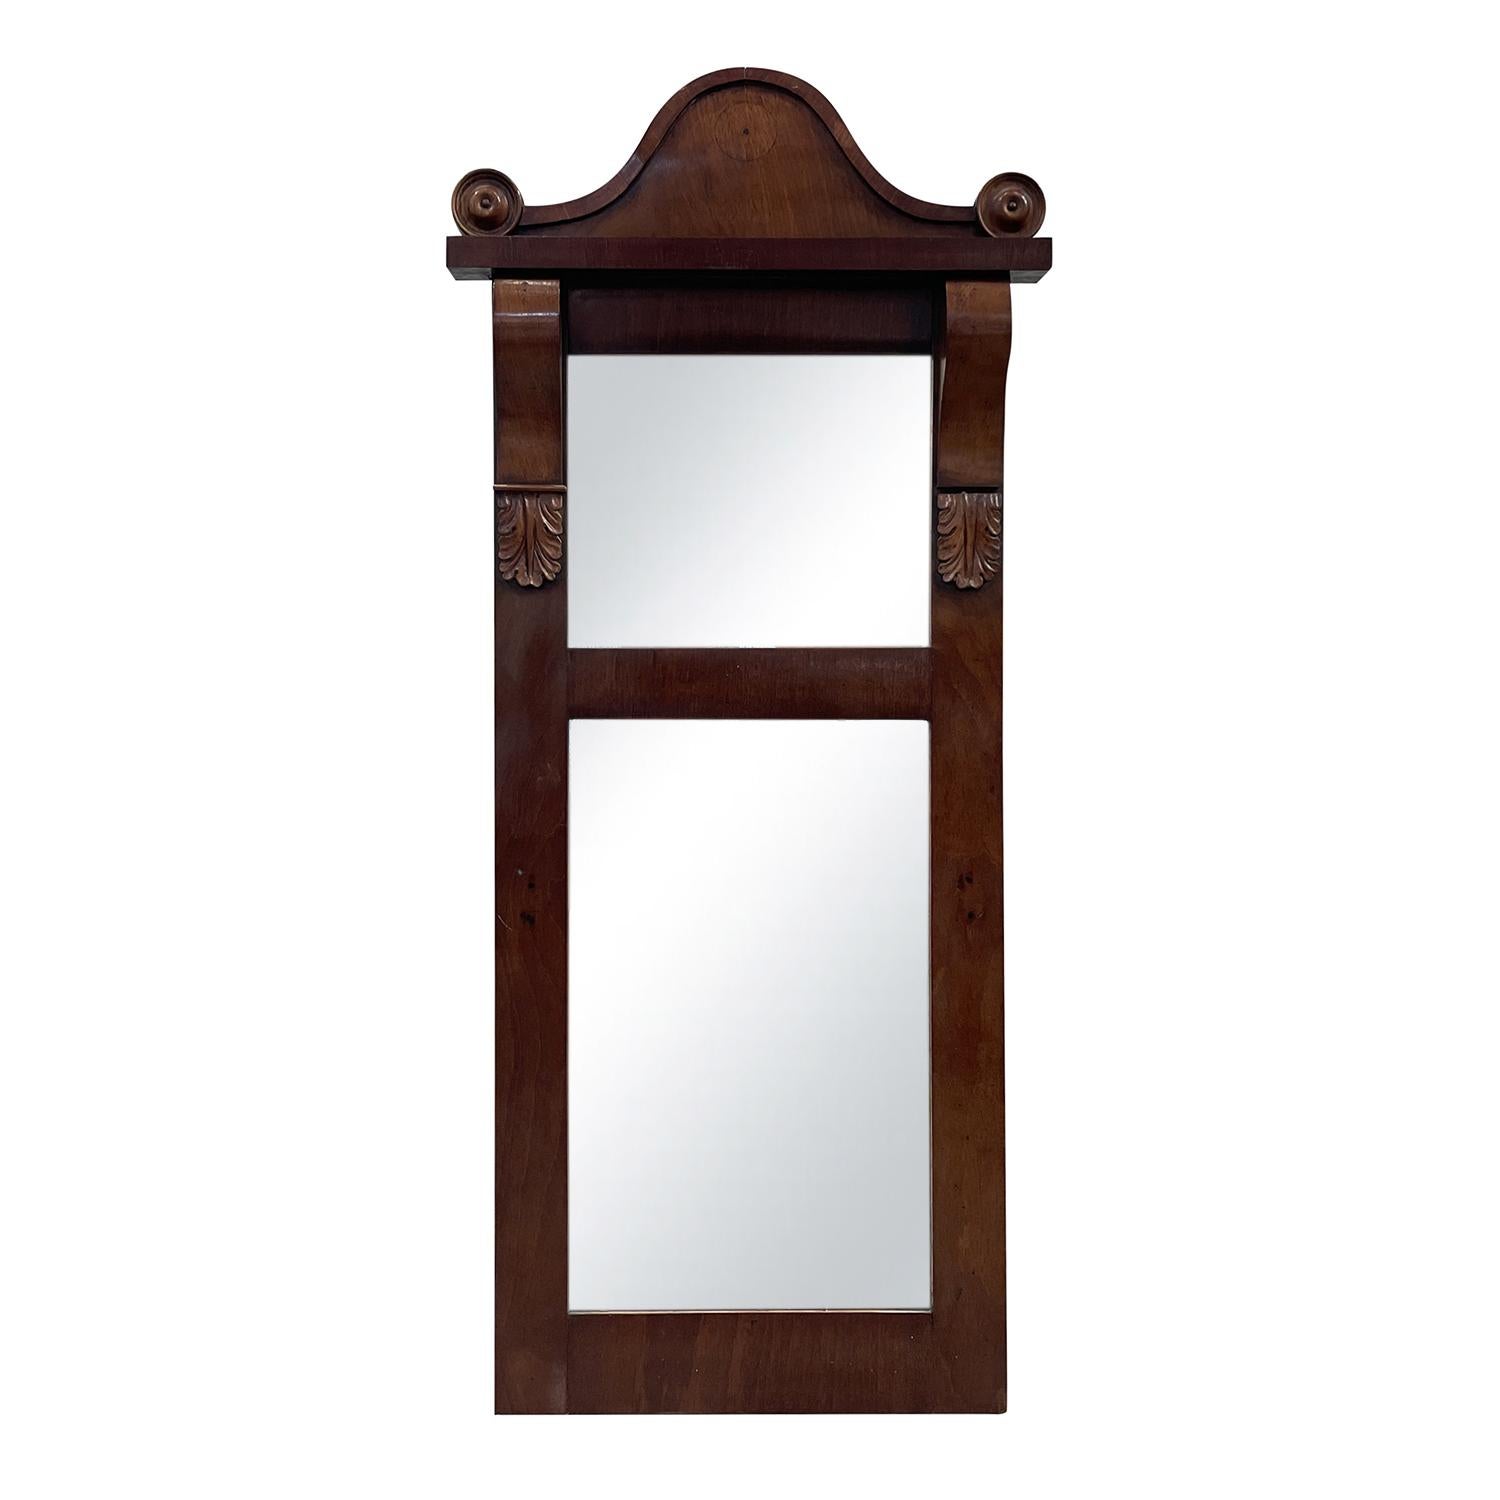 An antique Baltic wall mirror made of hand crafted polished Mahogany, in good condition. The 19th Century mirror contains the original two-part mirrored glass, particularized by detailed wood carvings. Minor fading, due to age. Wear consistent with